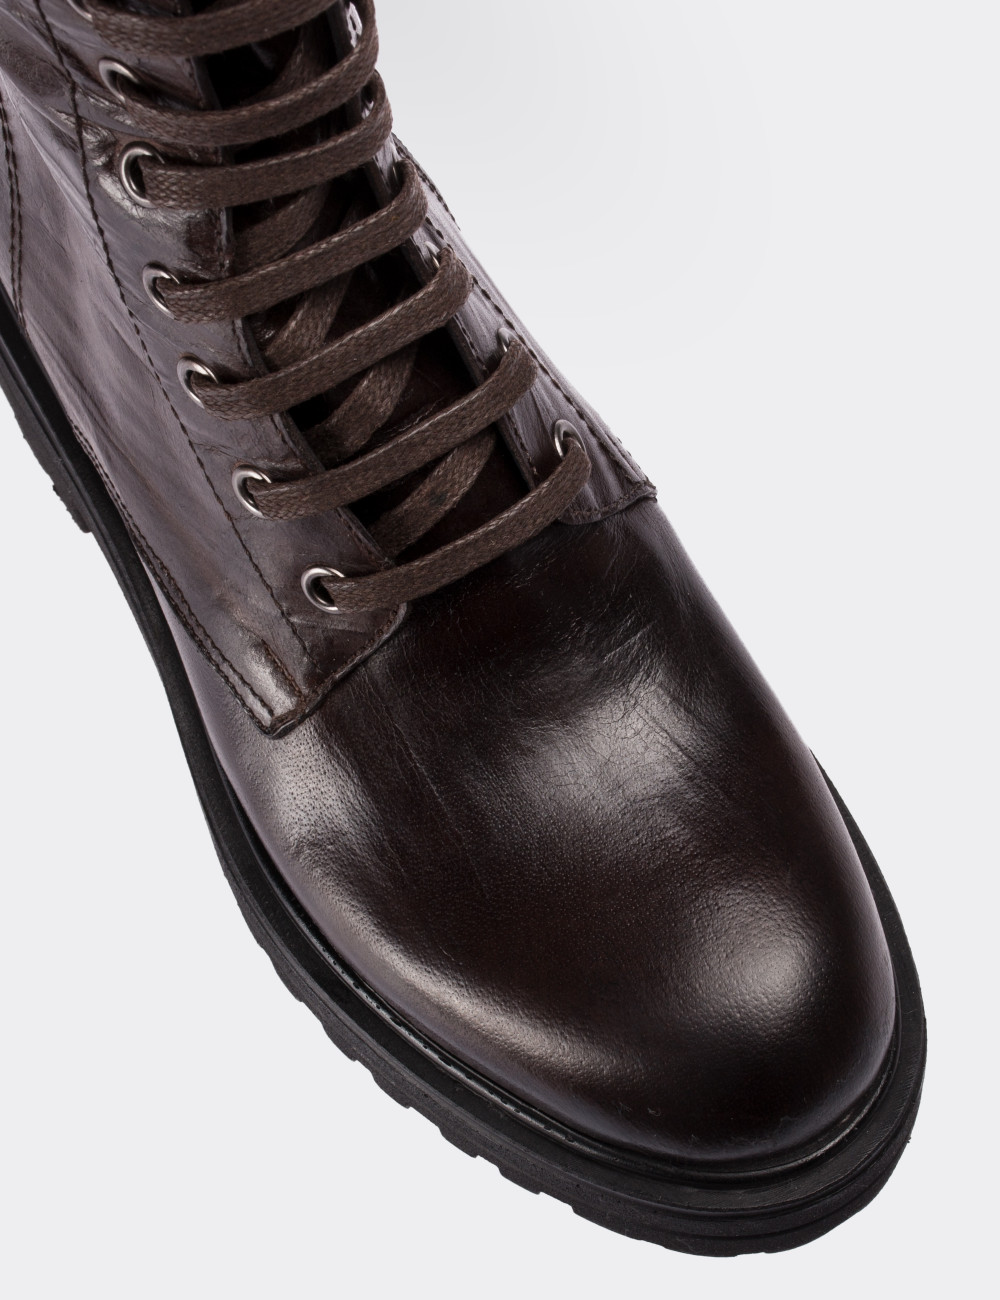 Brown  Leather Postal Boots - 01803ZKHVE01